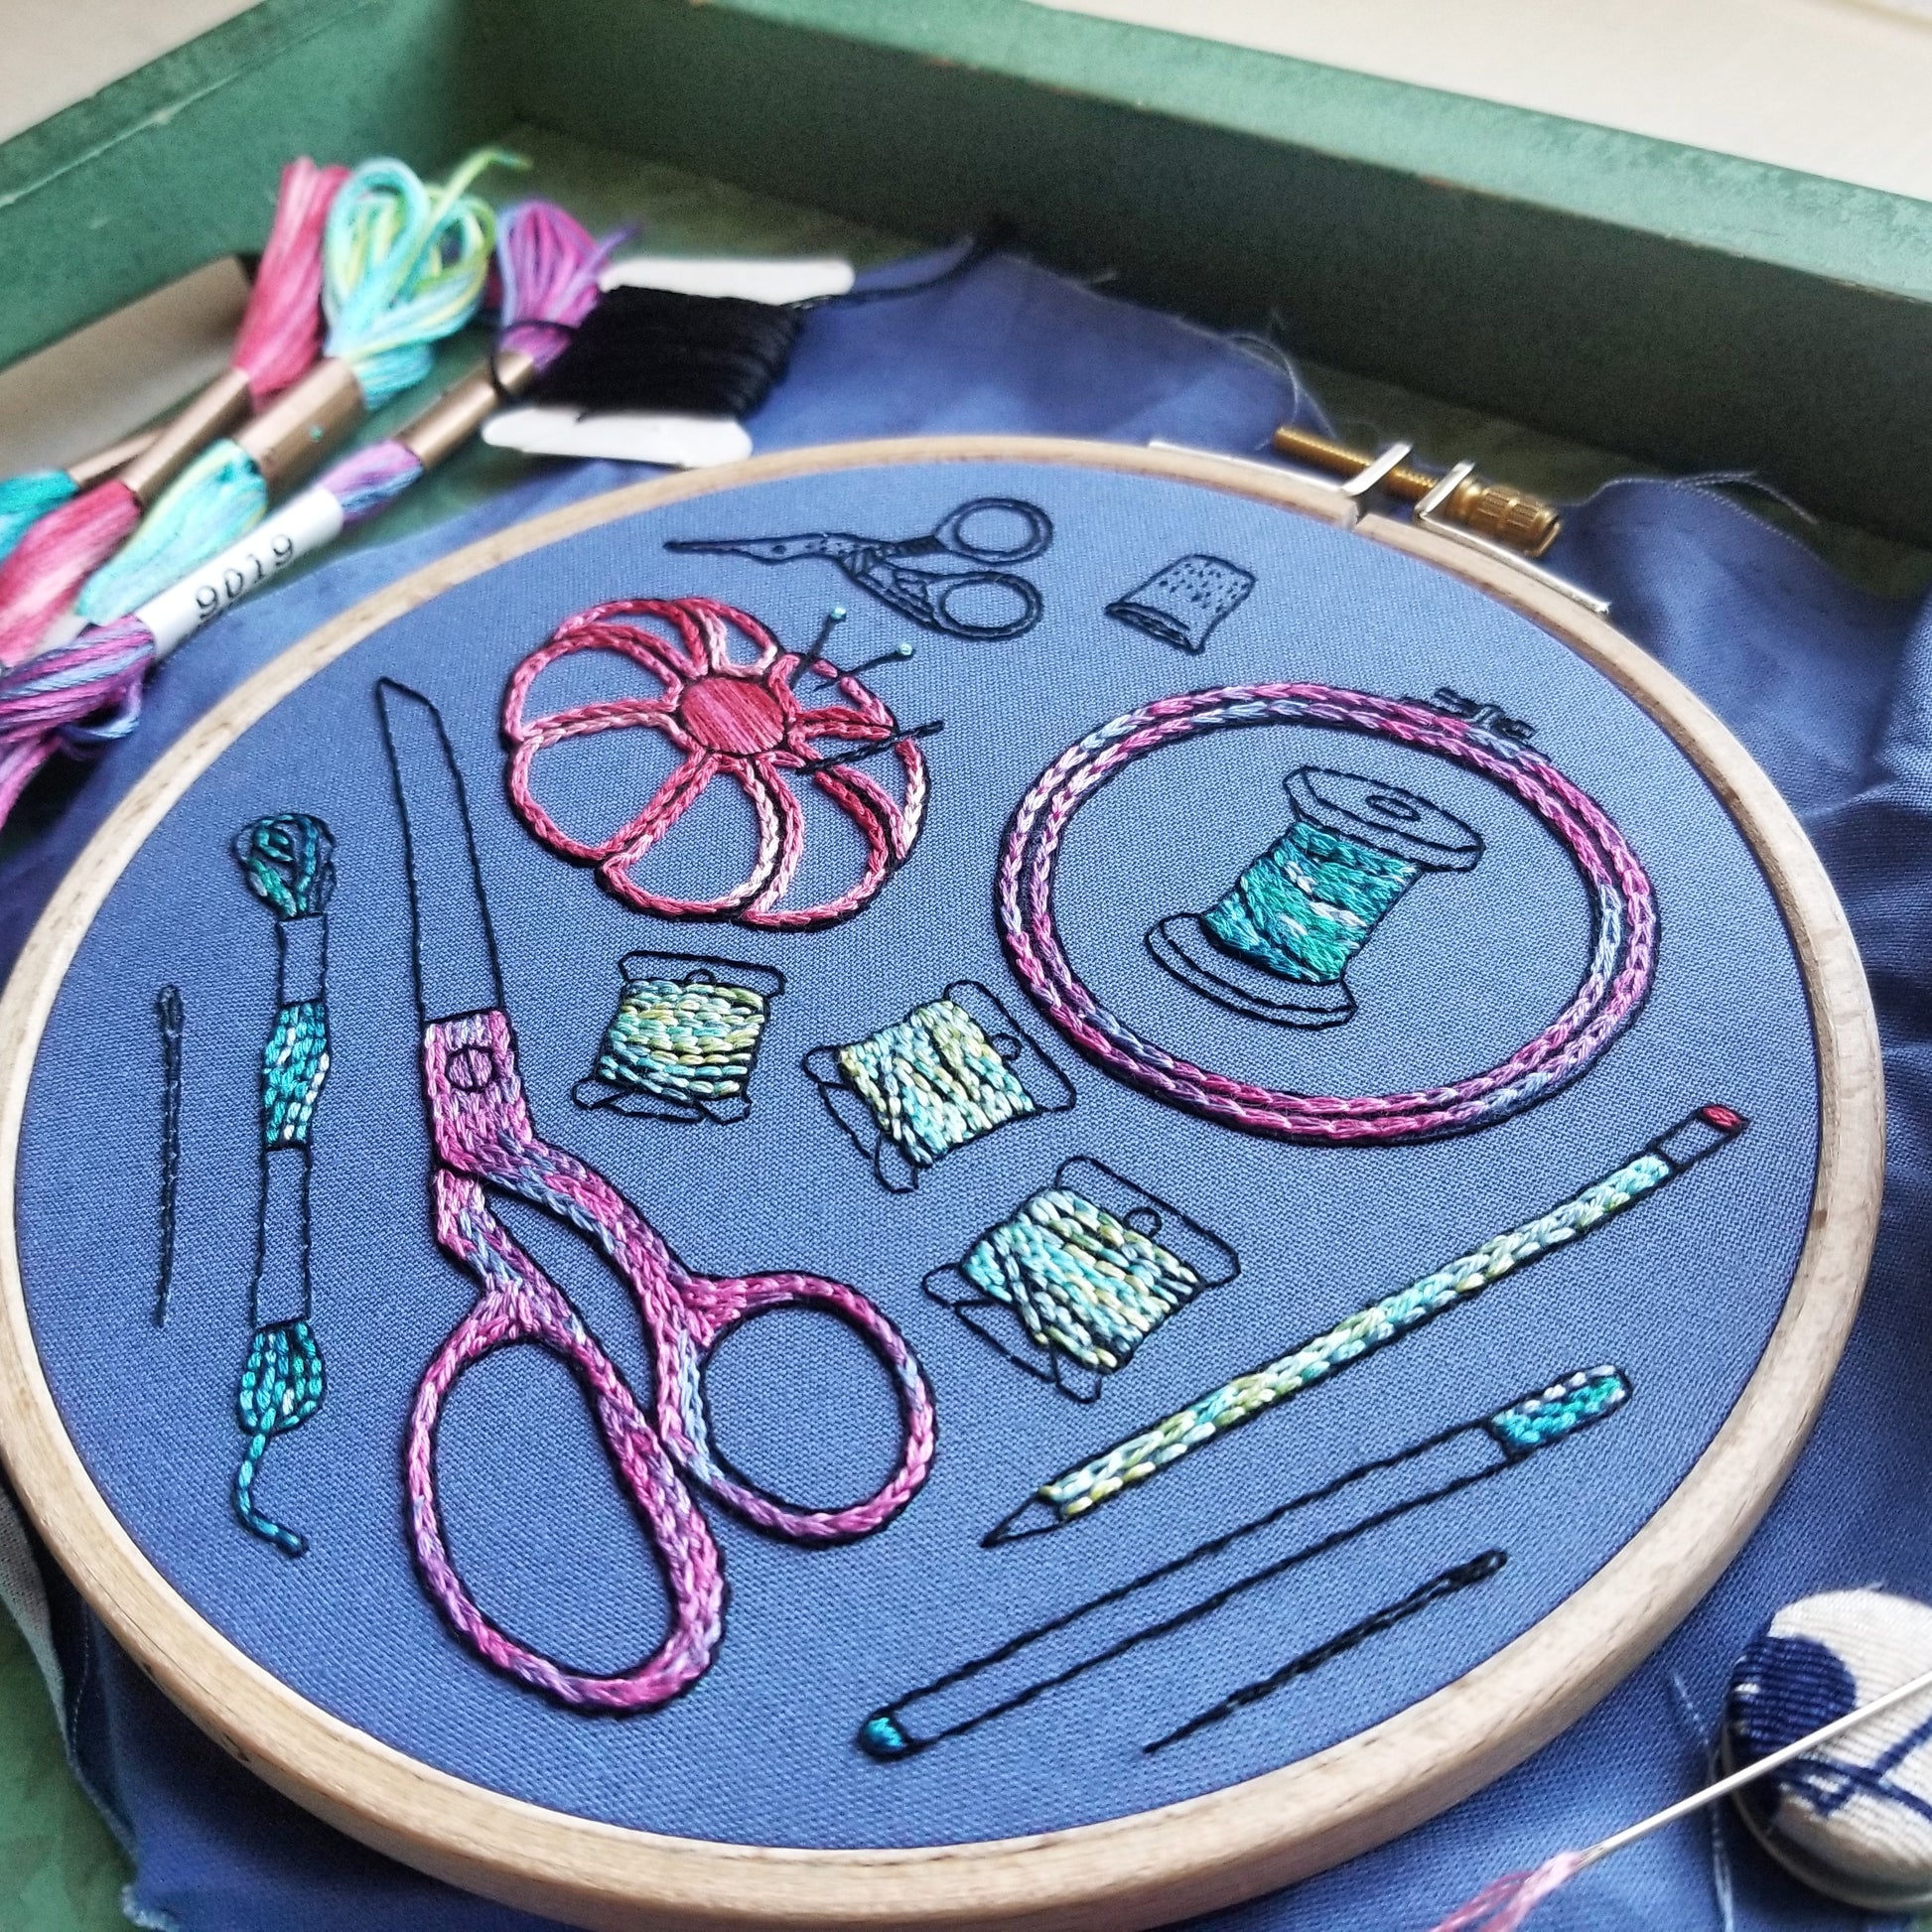 Embroidery Essentials: Craft Supplies to Make Hand Embroidery Easier and Fun